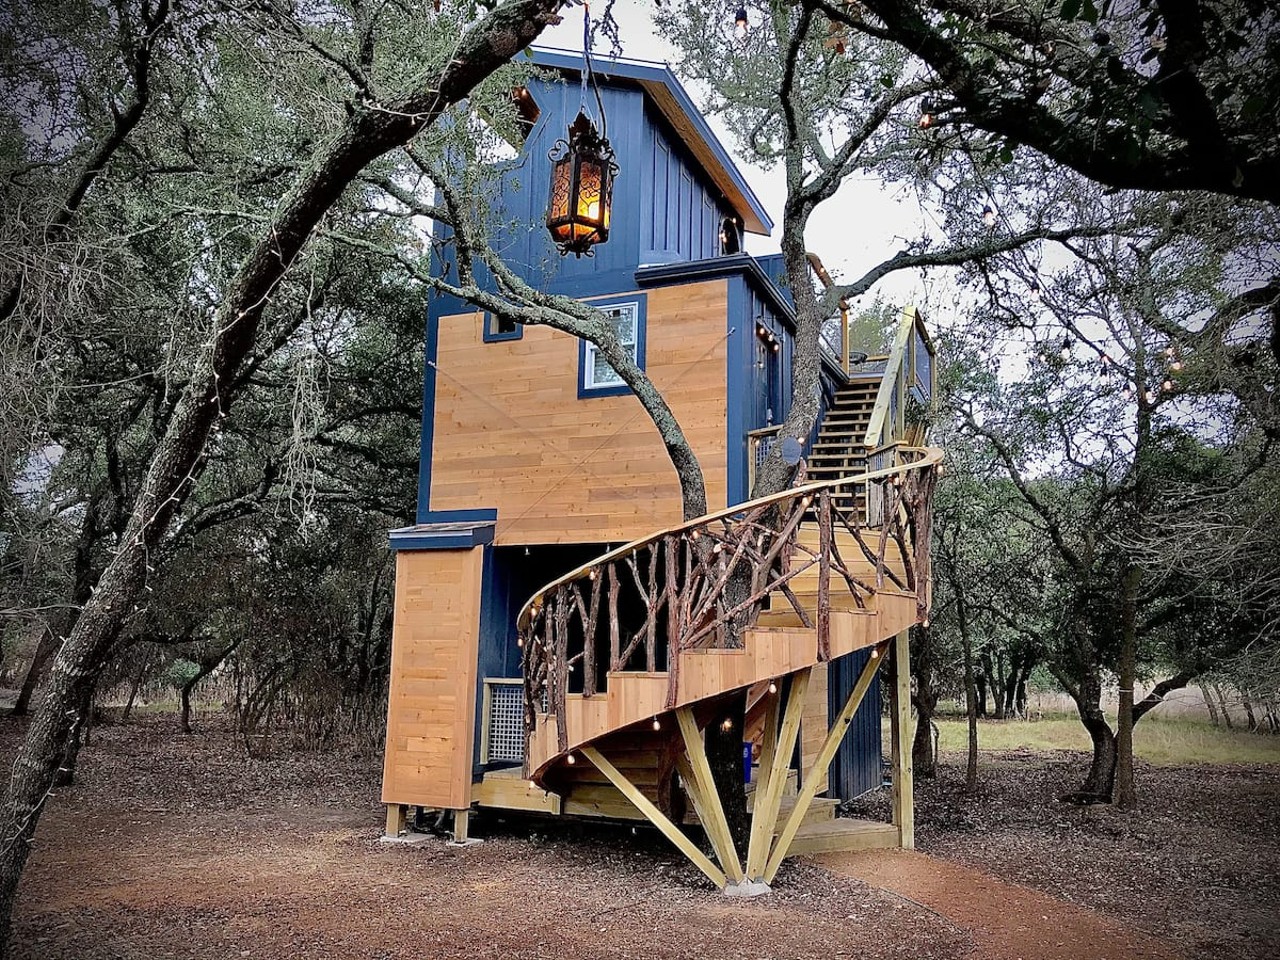 Acorn Treehouse at HoneyTree Farm, Fredericksburg
$356 per night
If you love tiny houses and don't mind stairs, this treehouse might be the place for you. The beautifully furnished abode in Fredericksburg even has an outdoor bath. If that sounds scary, don't worry — it's enclosed on three sides for privacy.